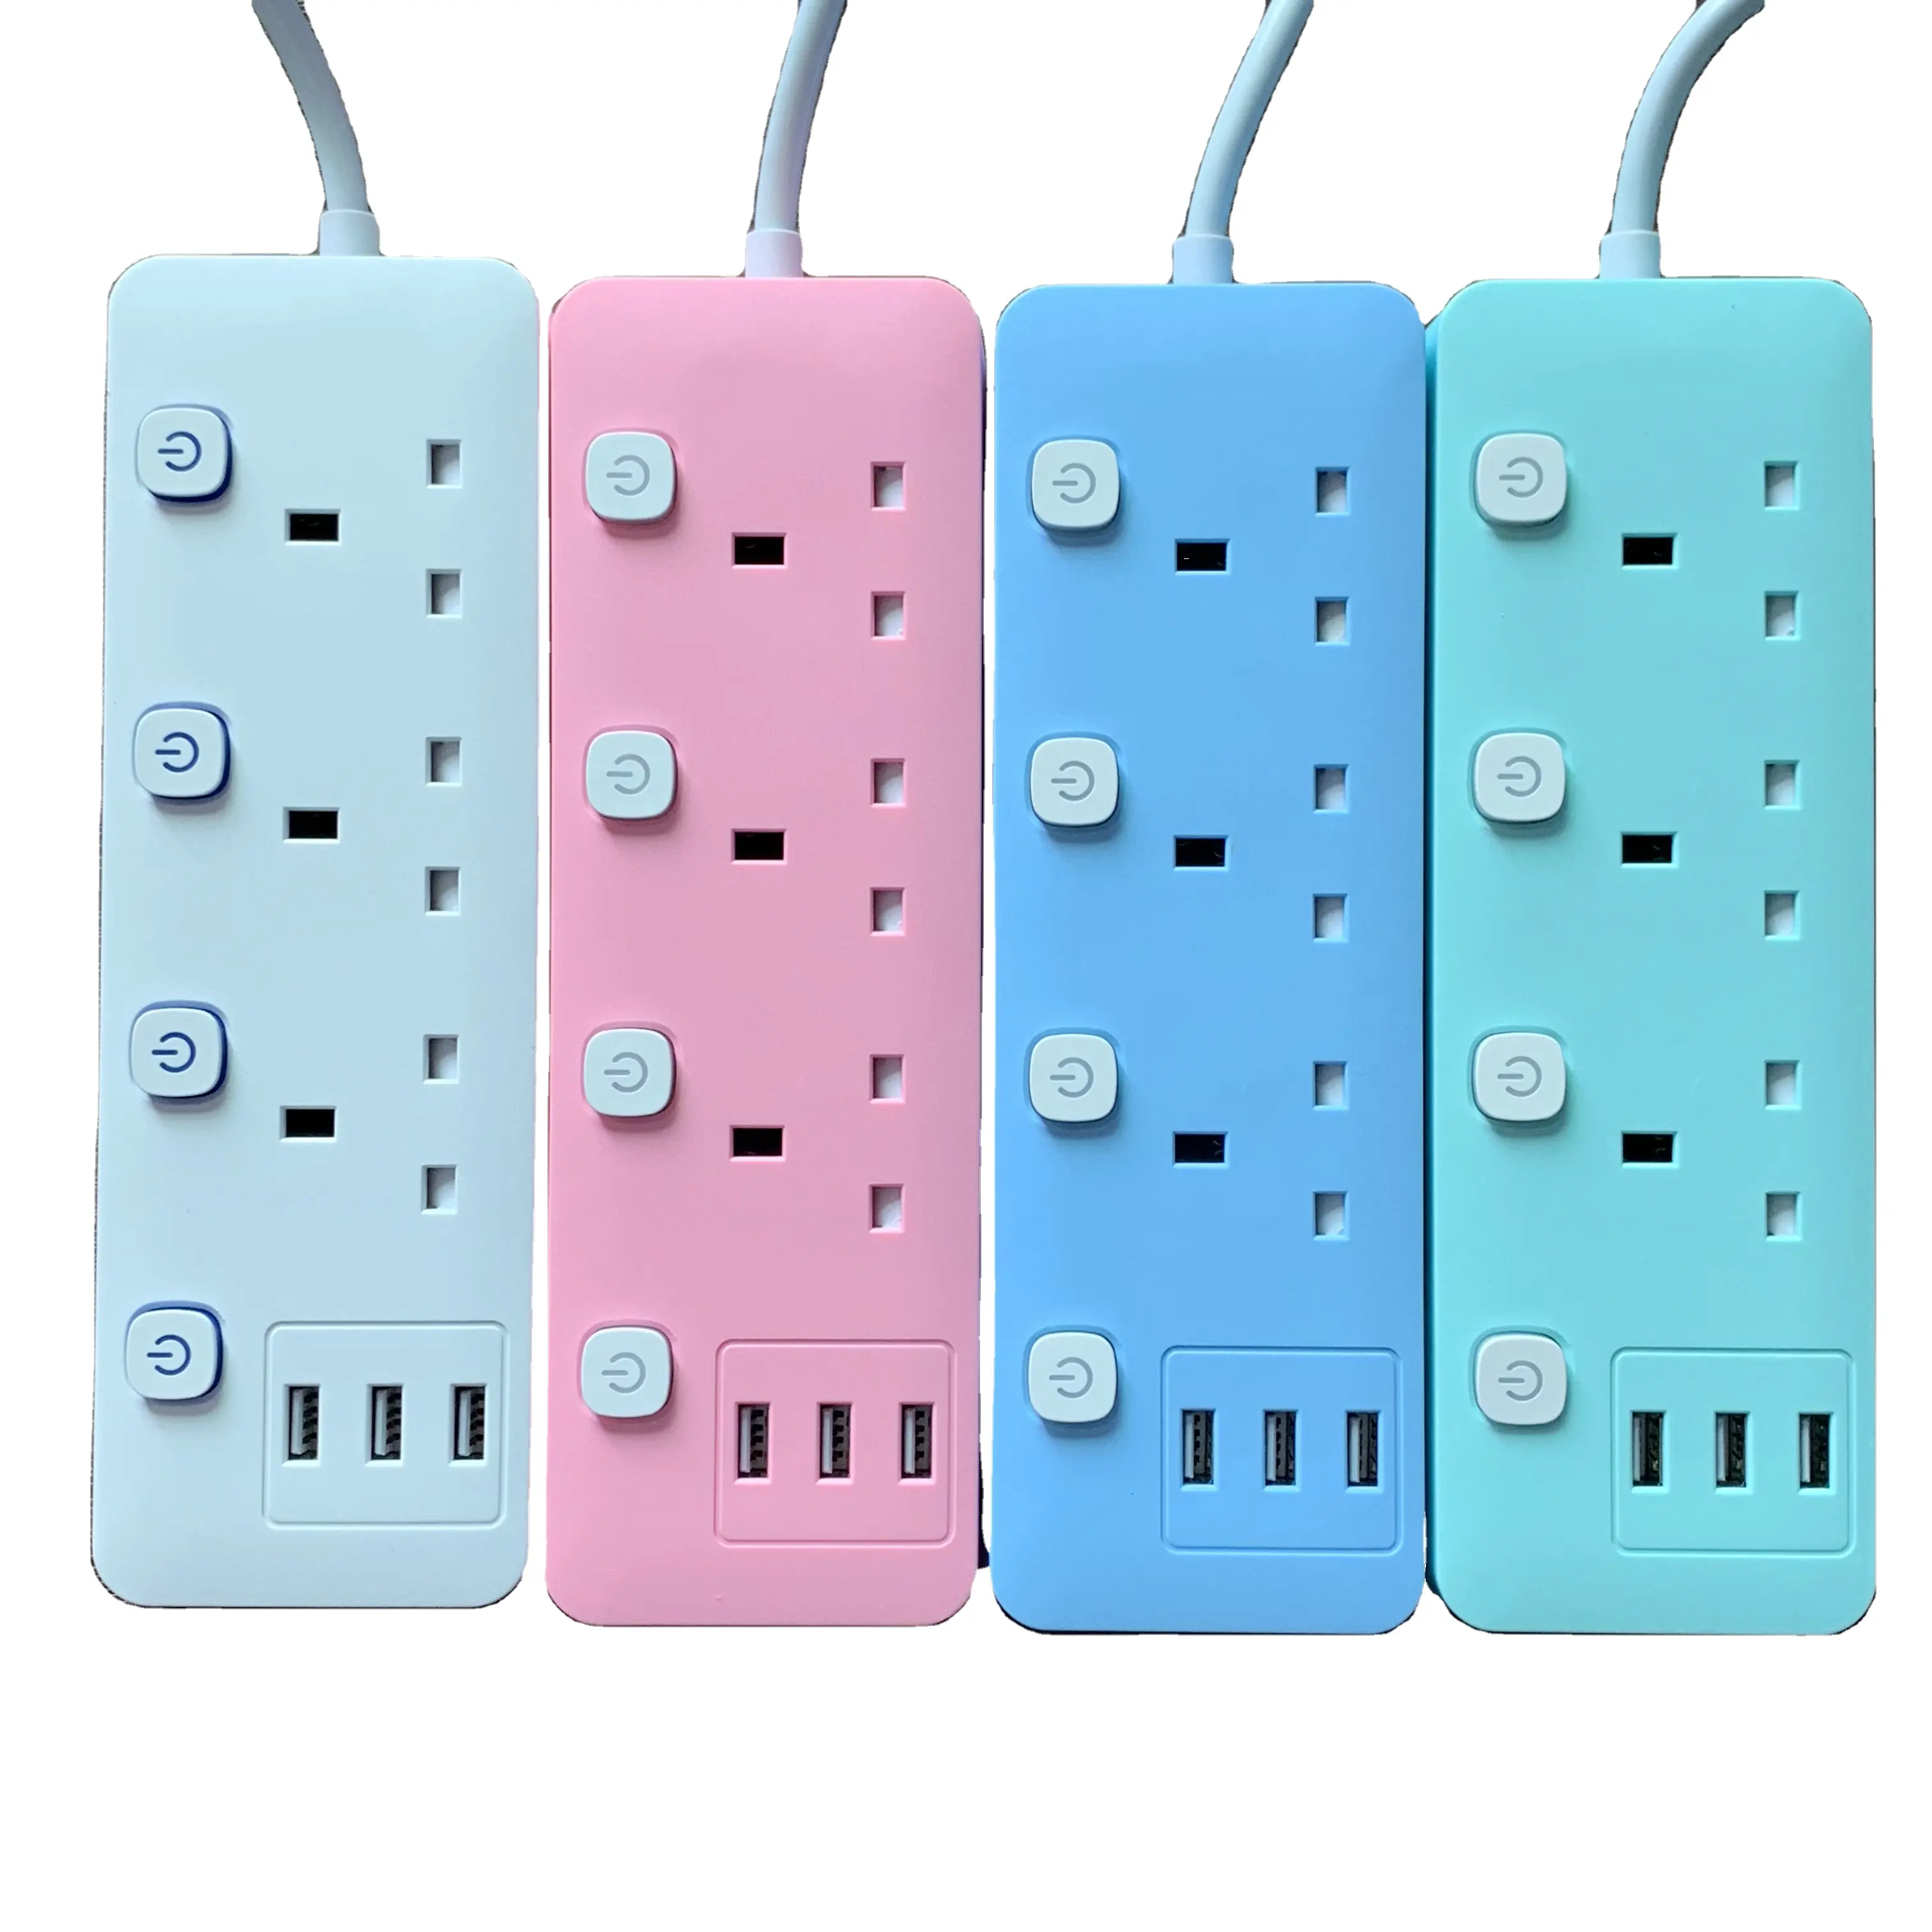 UK Standard Power Adapter with Multi-Outlets 3 AC Power Outlets Electrical Plug Socket with 3 USB to Charge